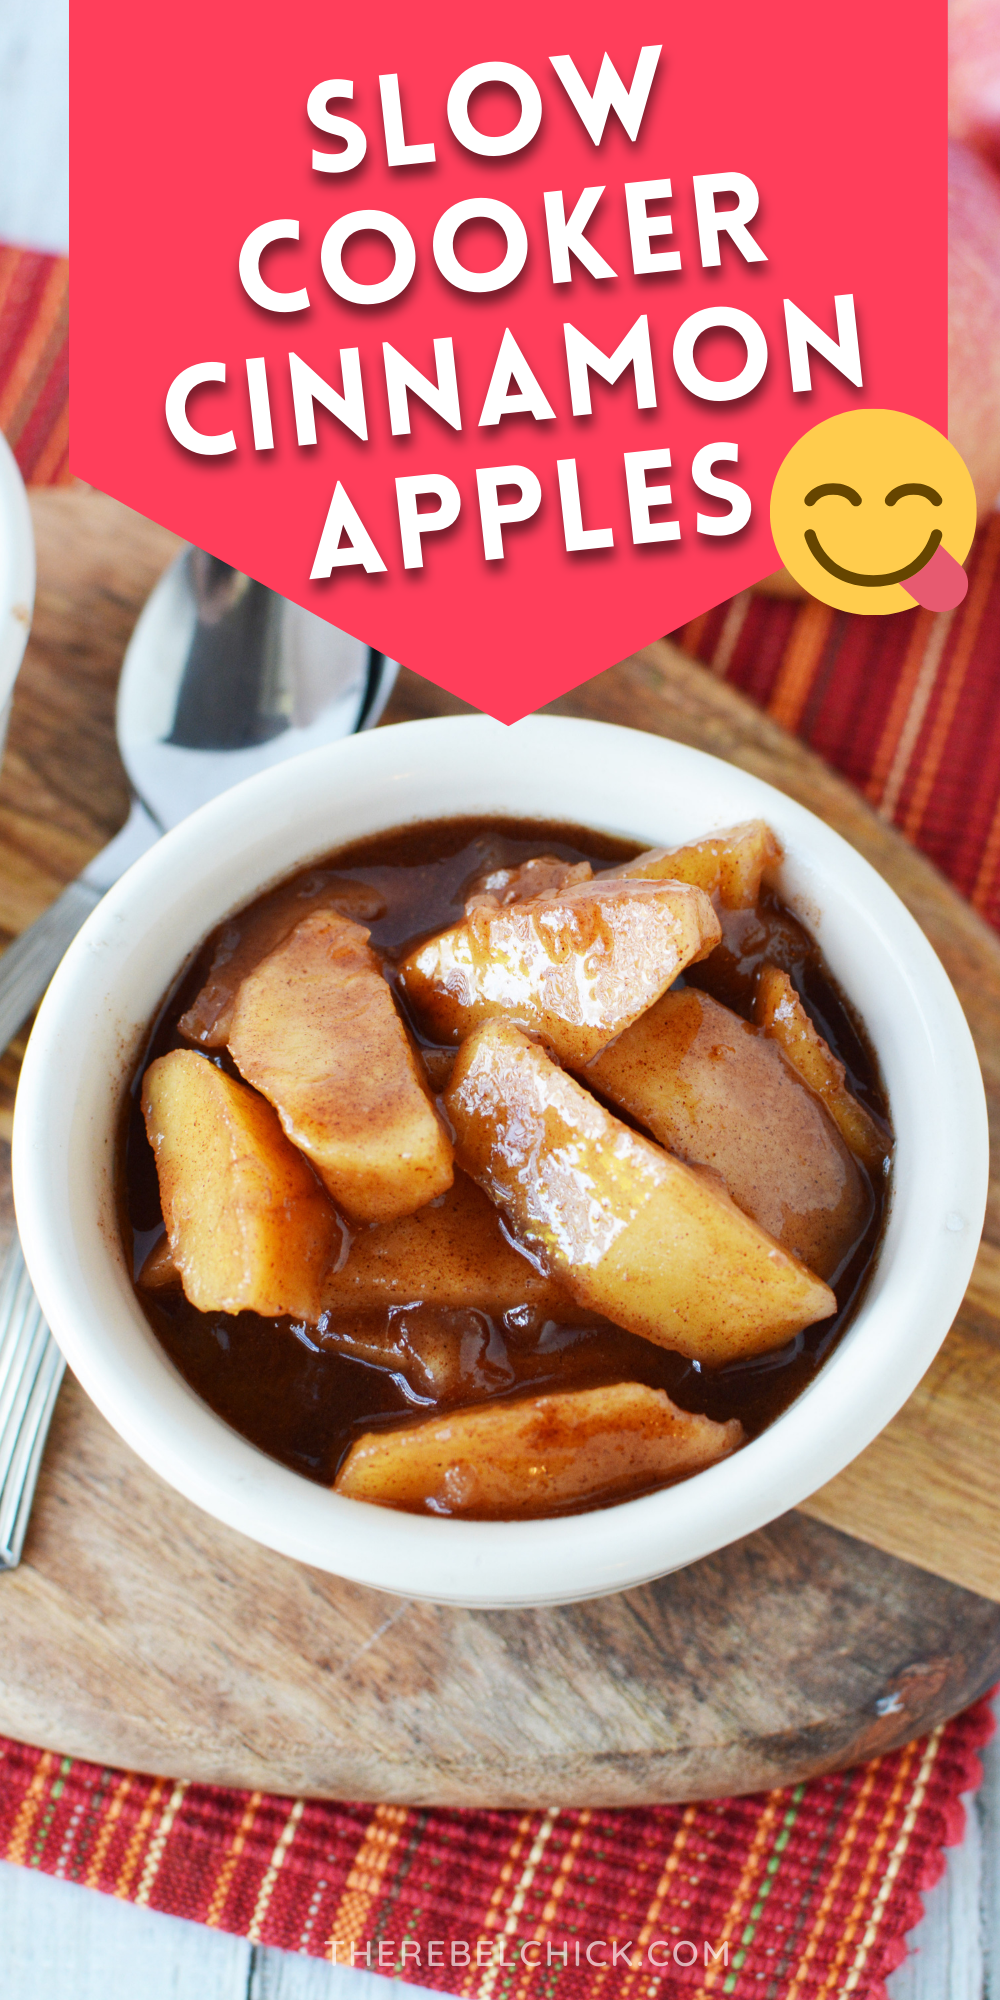 small bowl full of chunks of apple covered in cinnamon and sauce